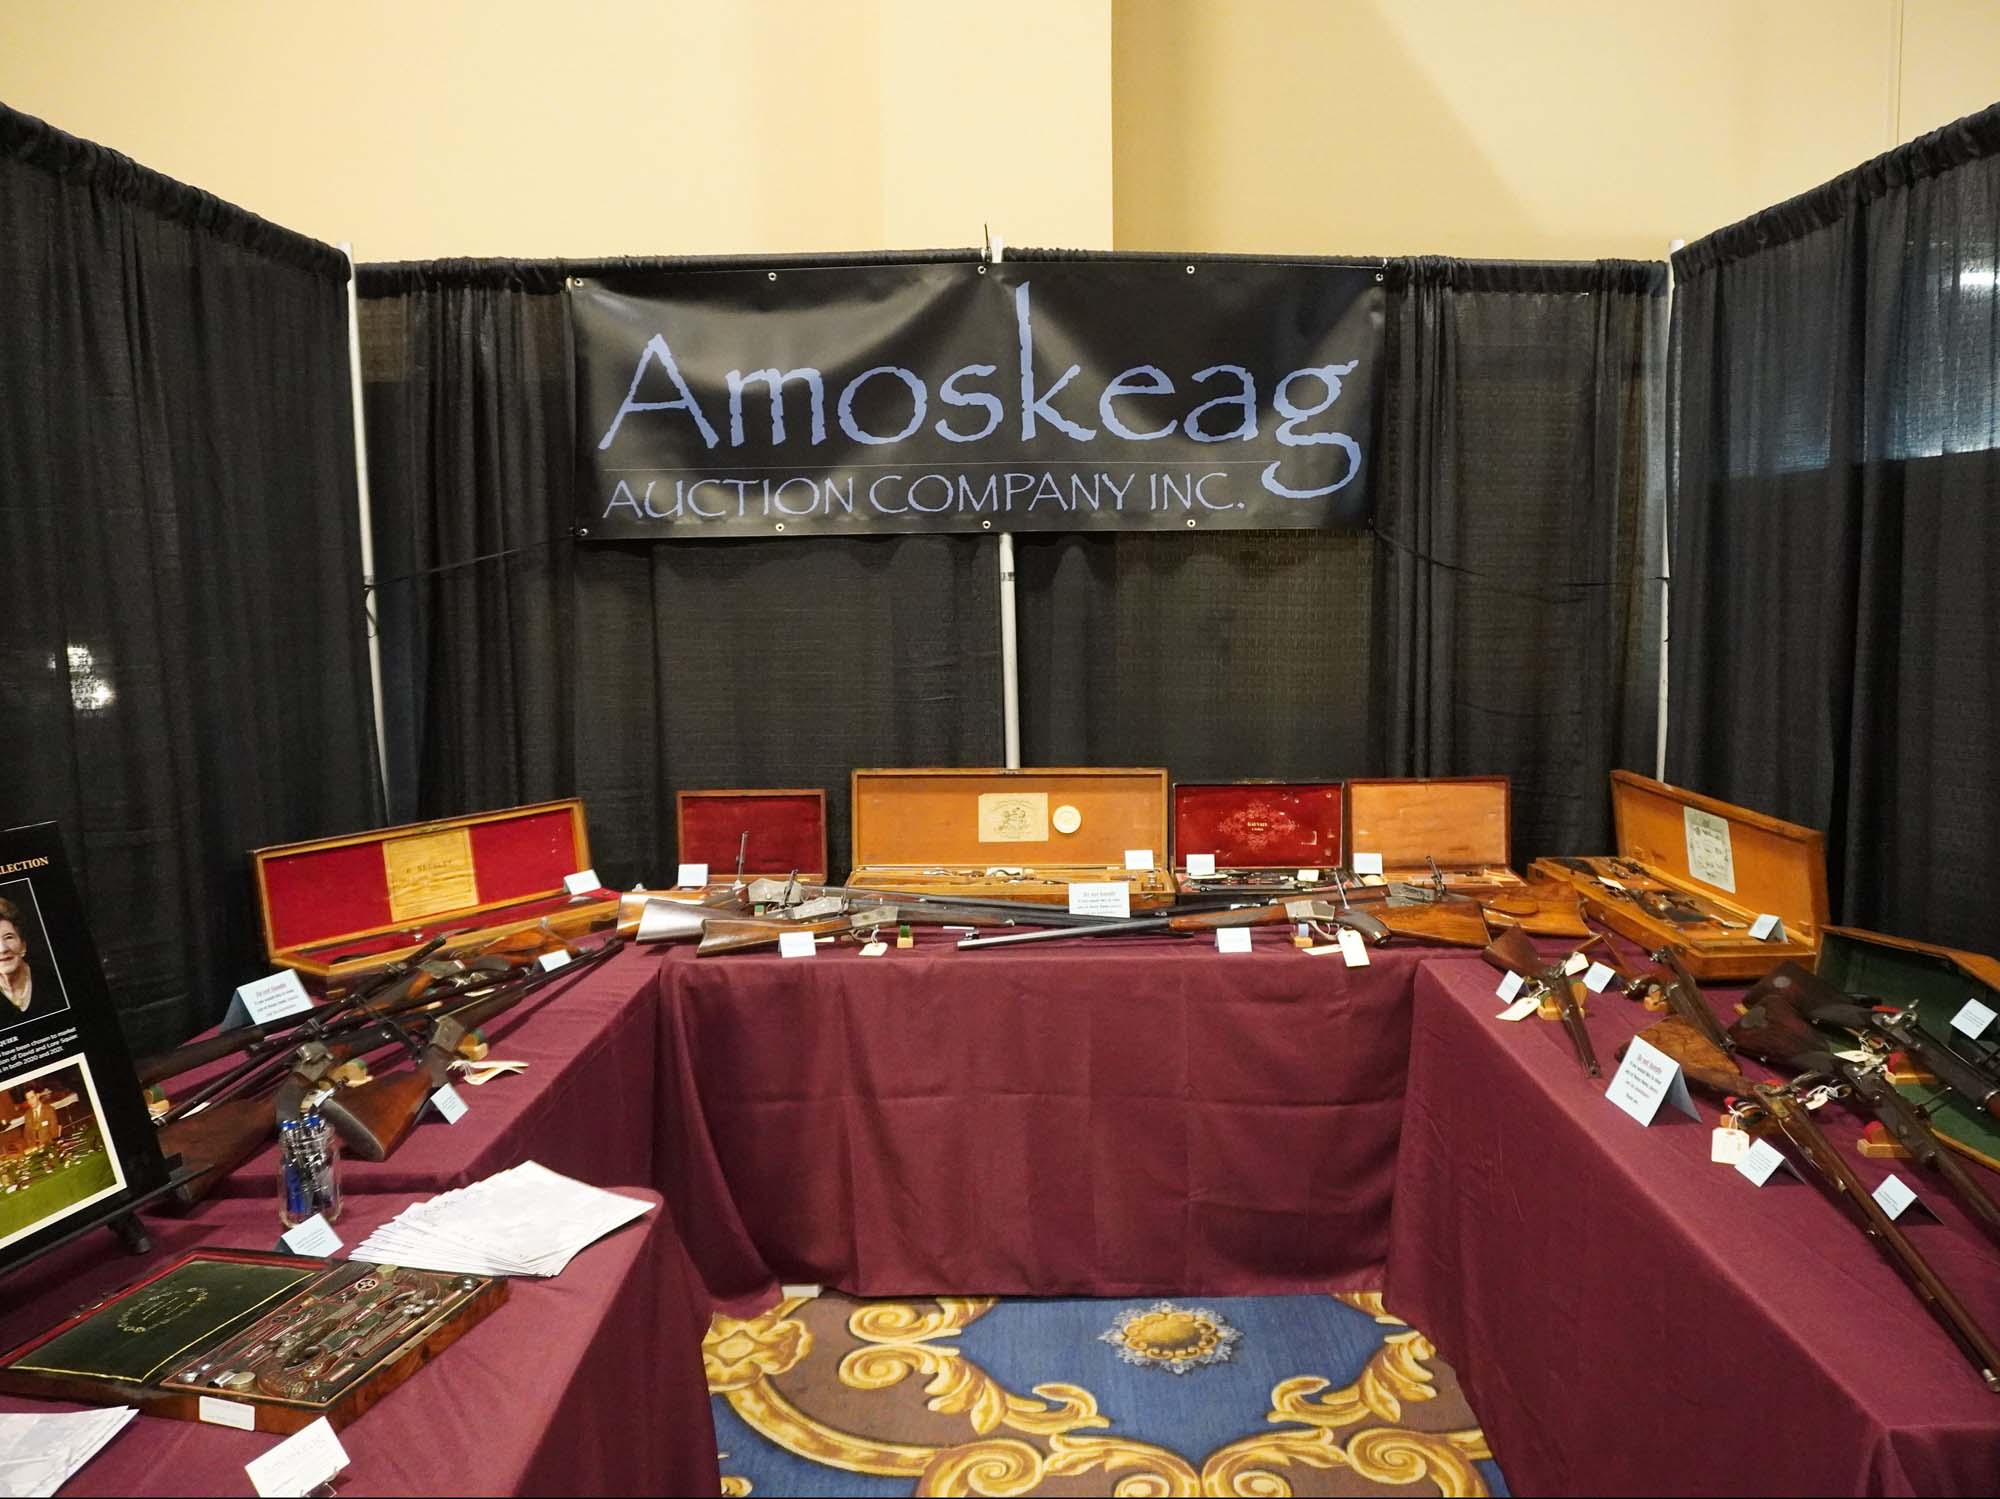 Antique Arms Show 2020 - Amoskeag Auctions Booth